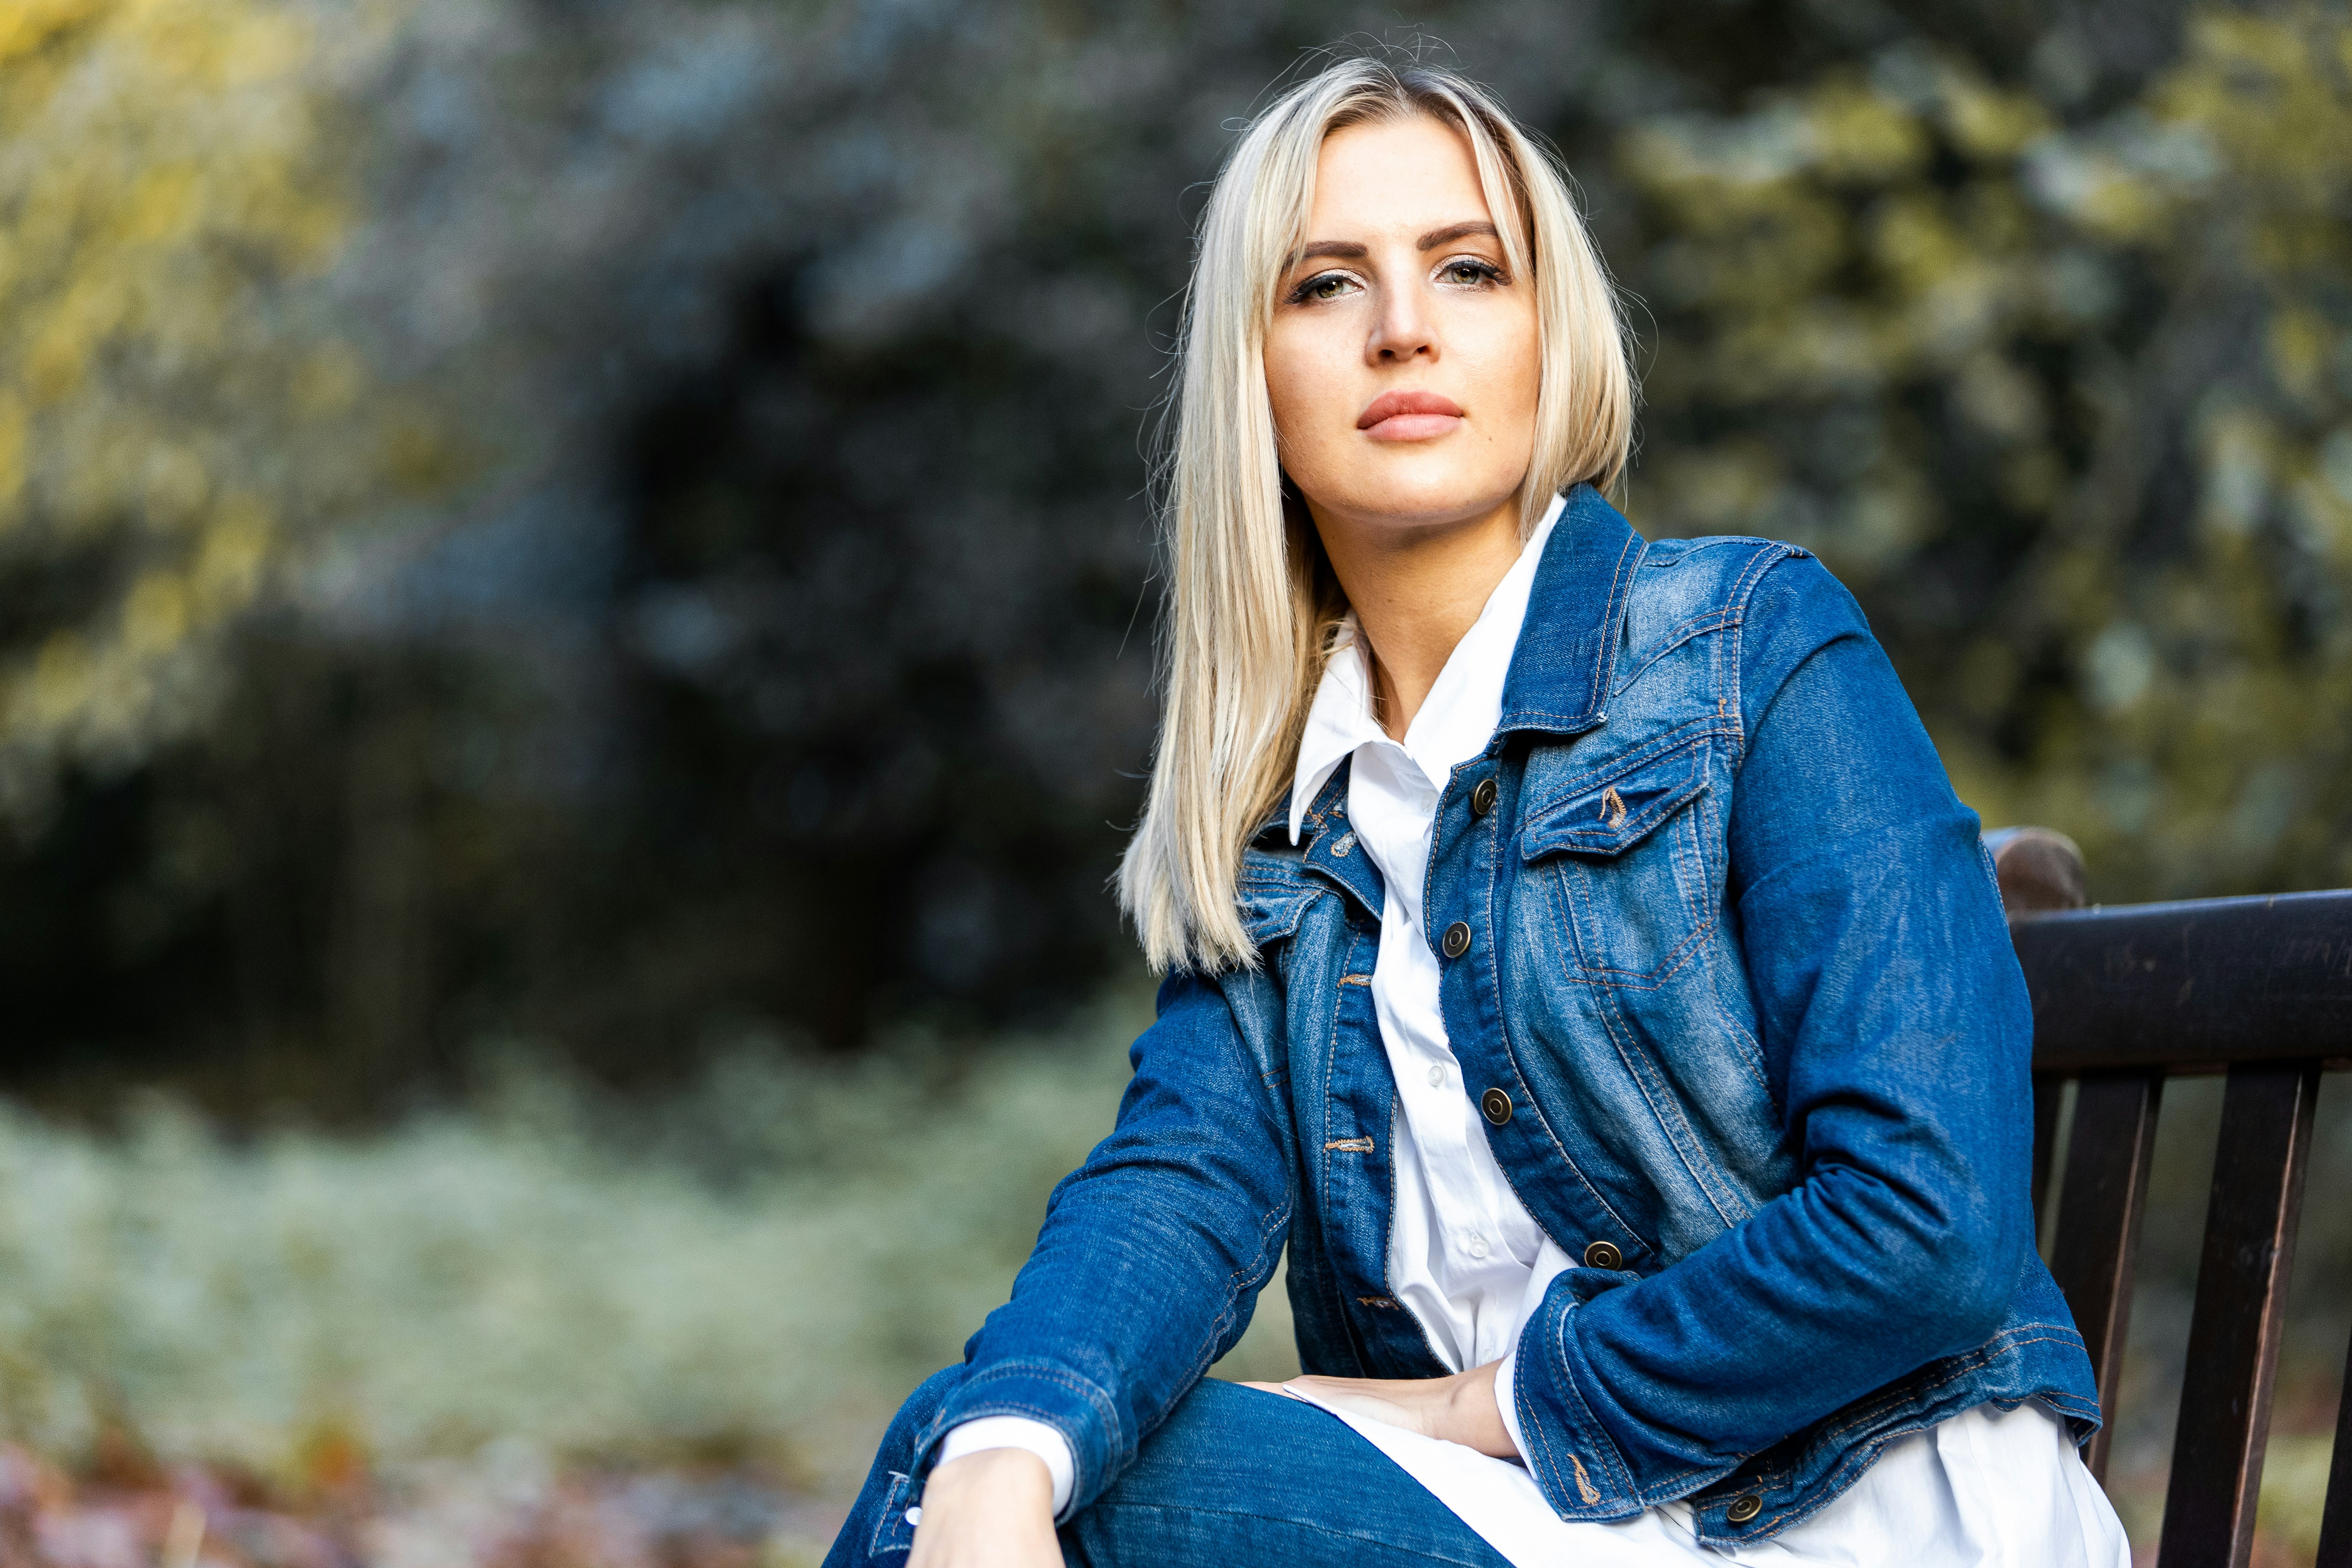 great photo recipe,how to photograph model: raminta rusteikaite | instagram: @rami.rrus | contact info@edwardhowell.photography for information.; woman in blue denim jacket sitting on brown wooden bench during daytime